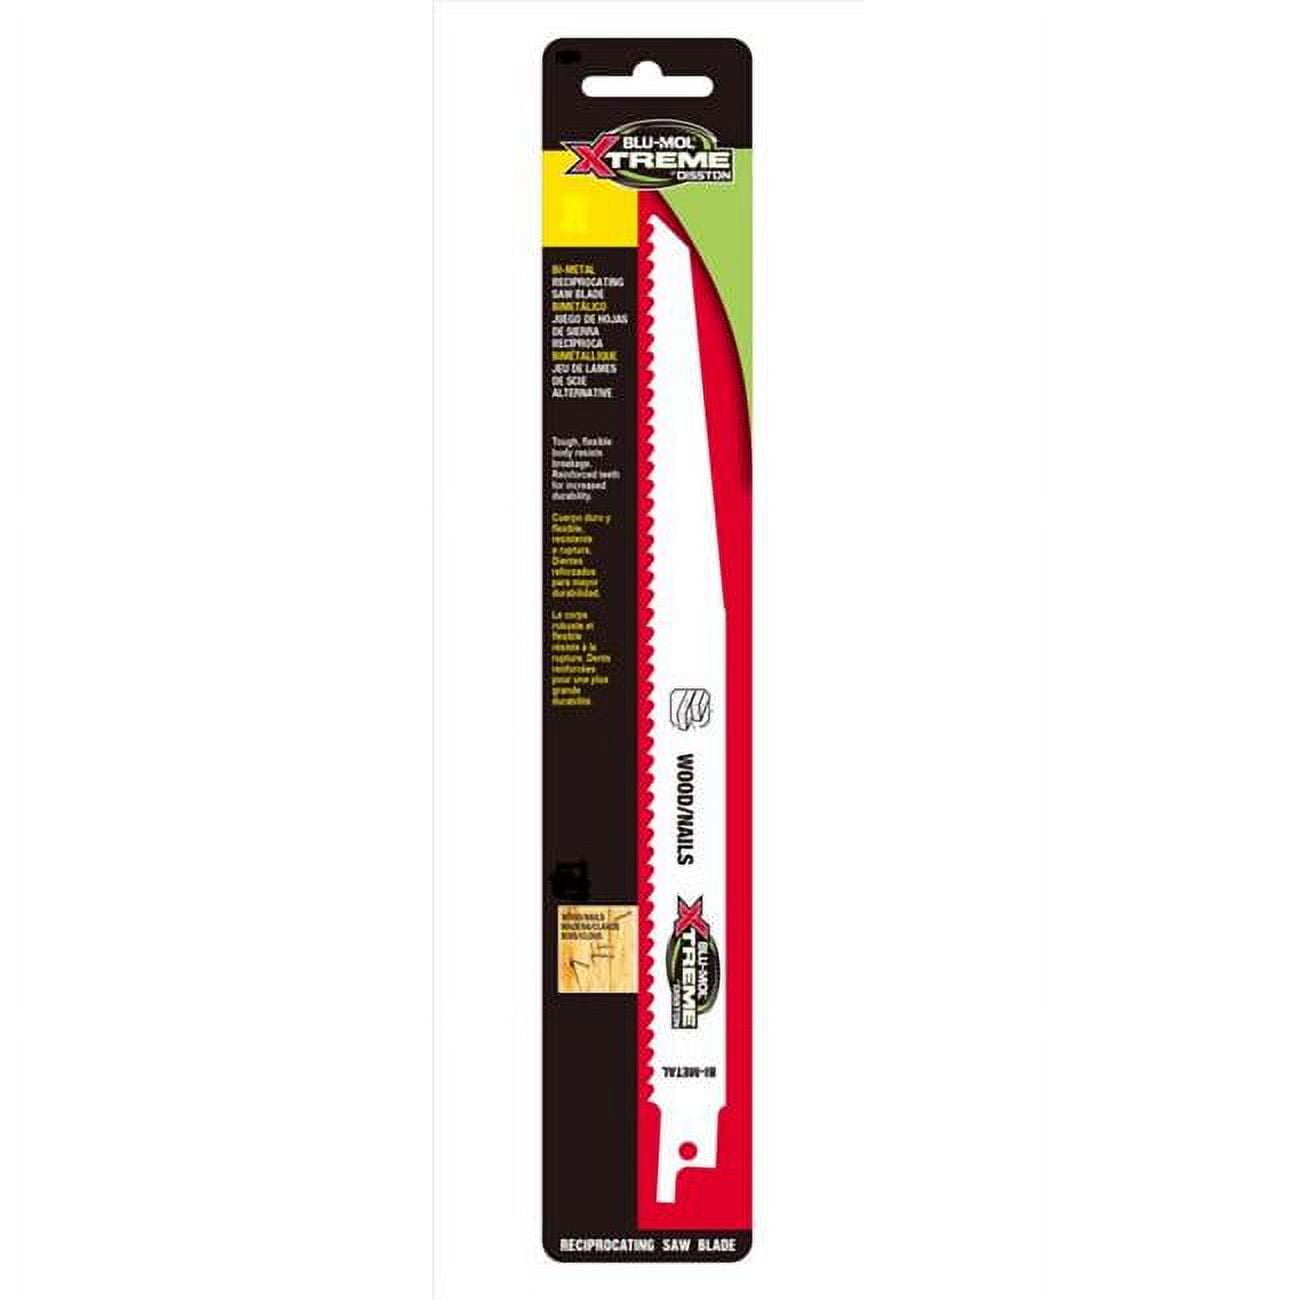 Picture of Blumol 2033639 Xtreme 6 in. Bi-Metal Reciprocating Saw Blade - 18 TPI